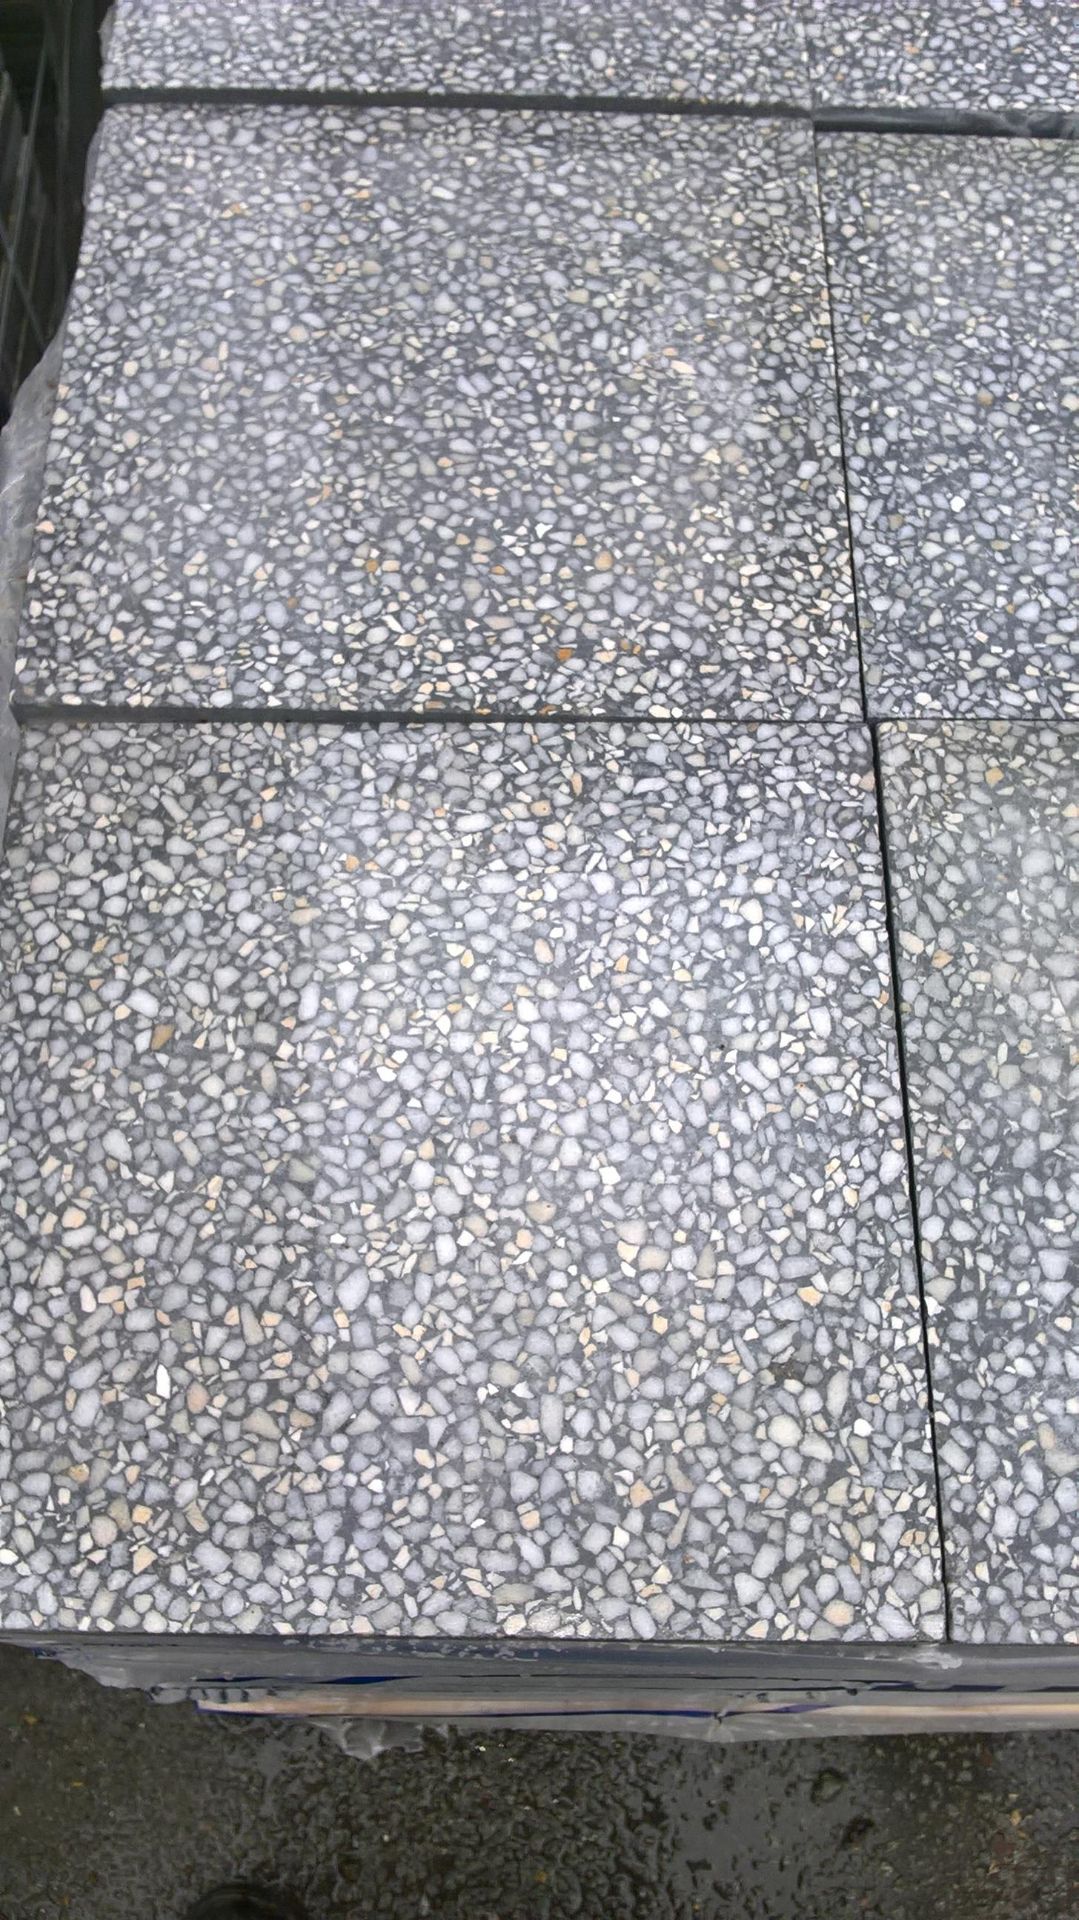 1 x pallet of brand new (z30099) grey terrazzo tiles ( 24 square yards coverage)